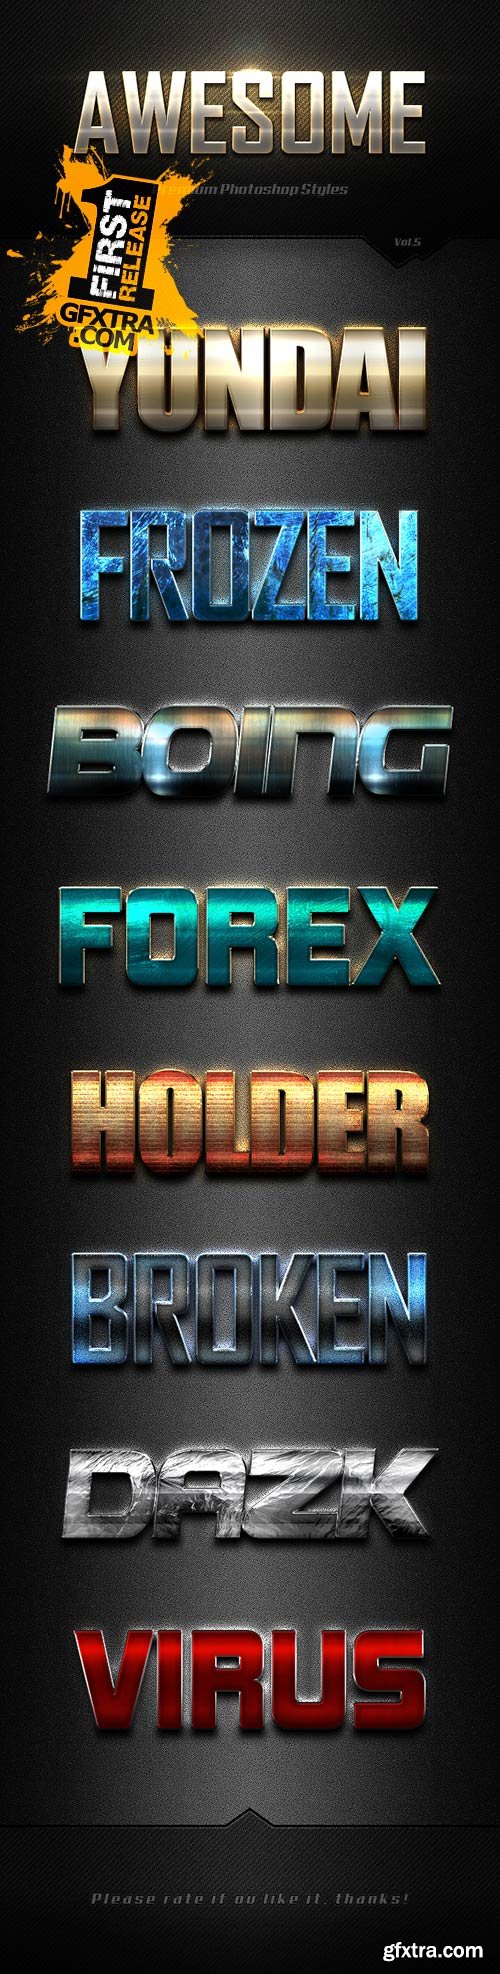 GraphicRiver - Awesome Photoshop Text Effects Vol.5 18299371